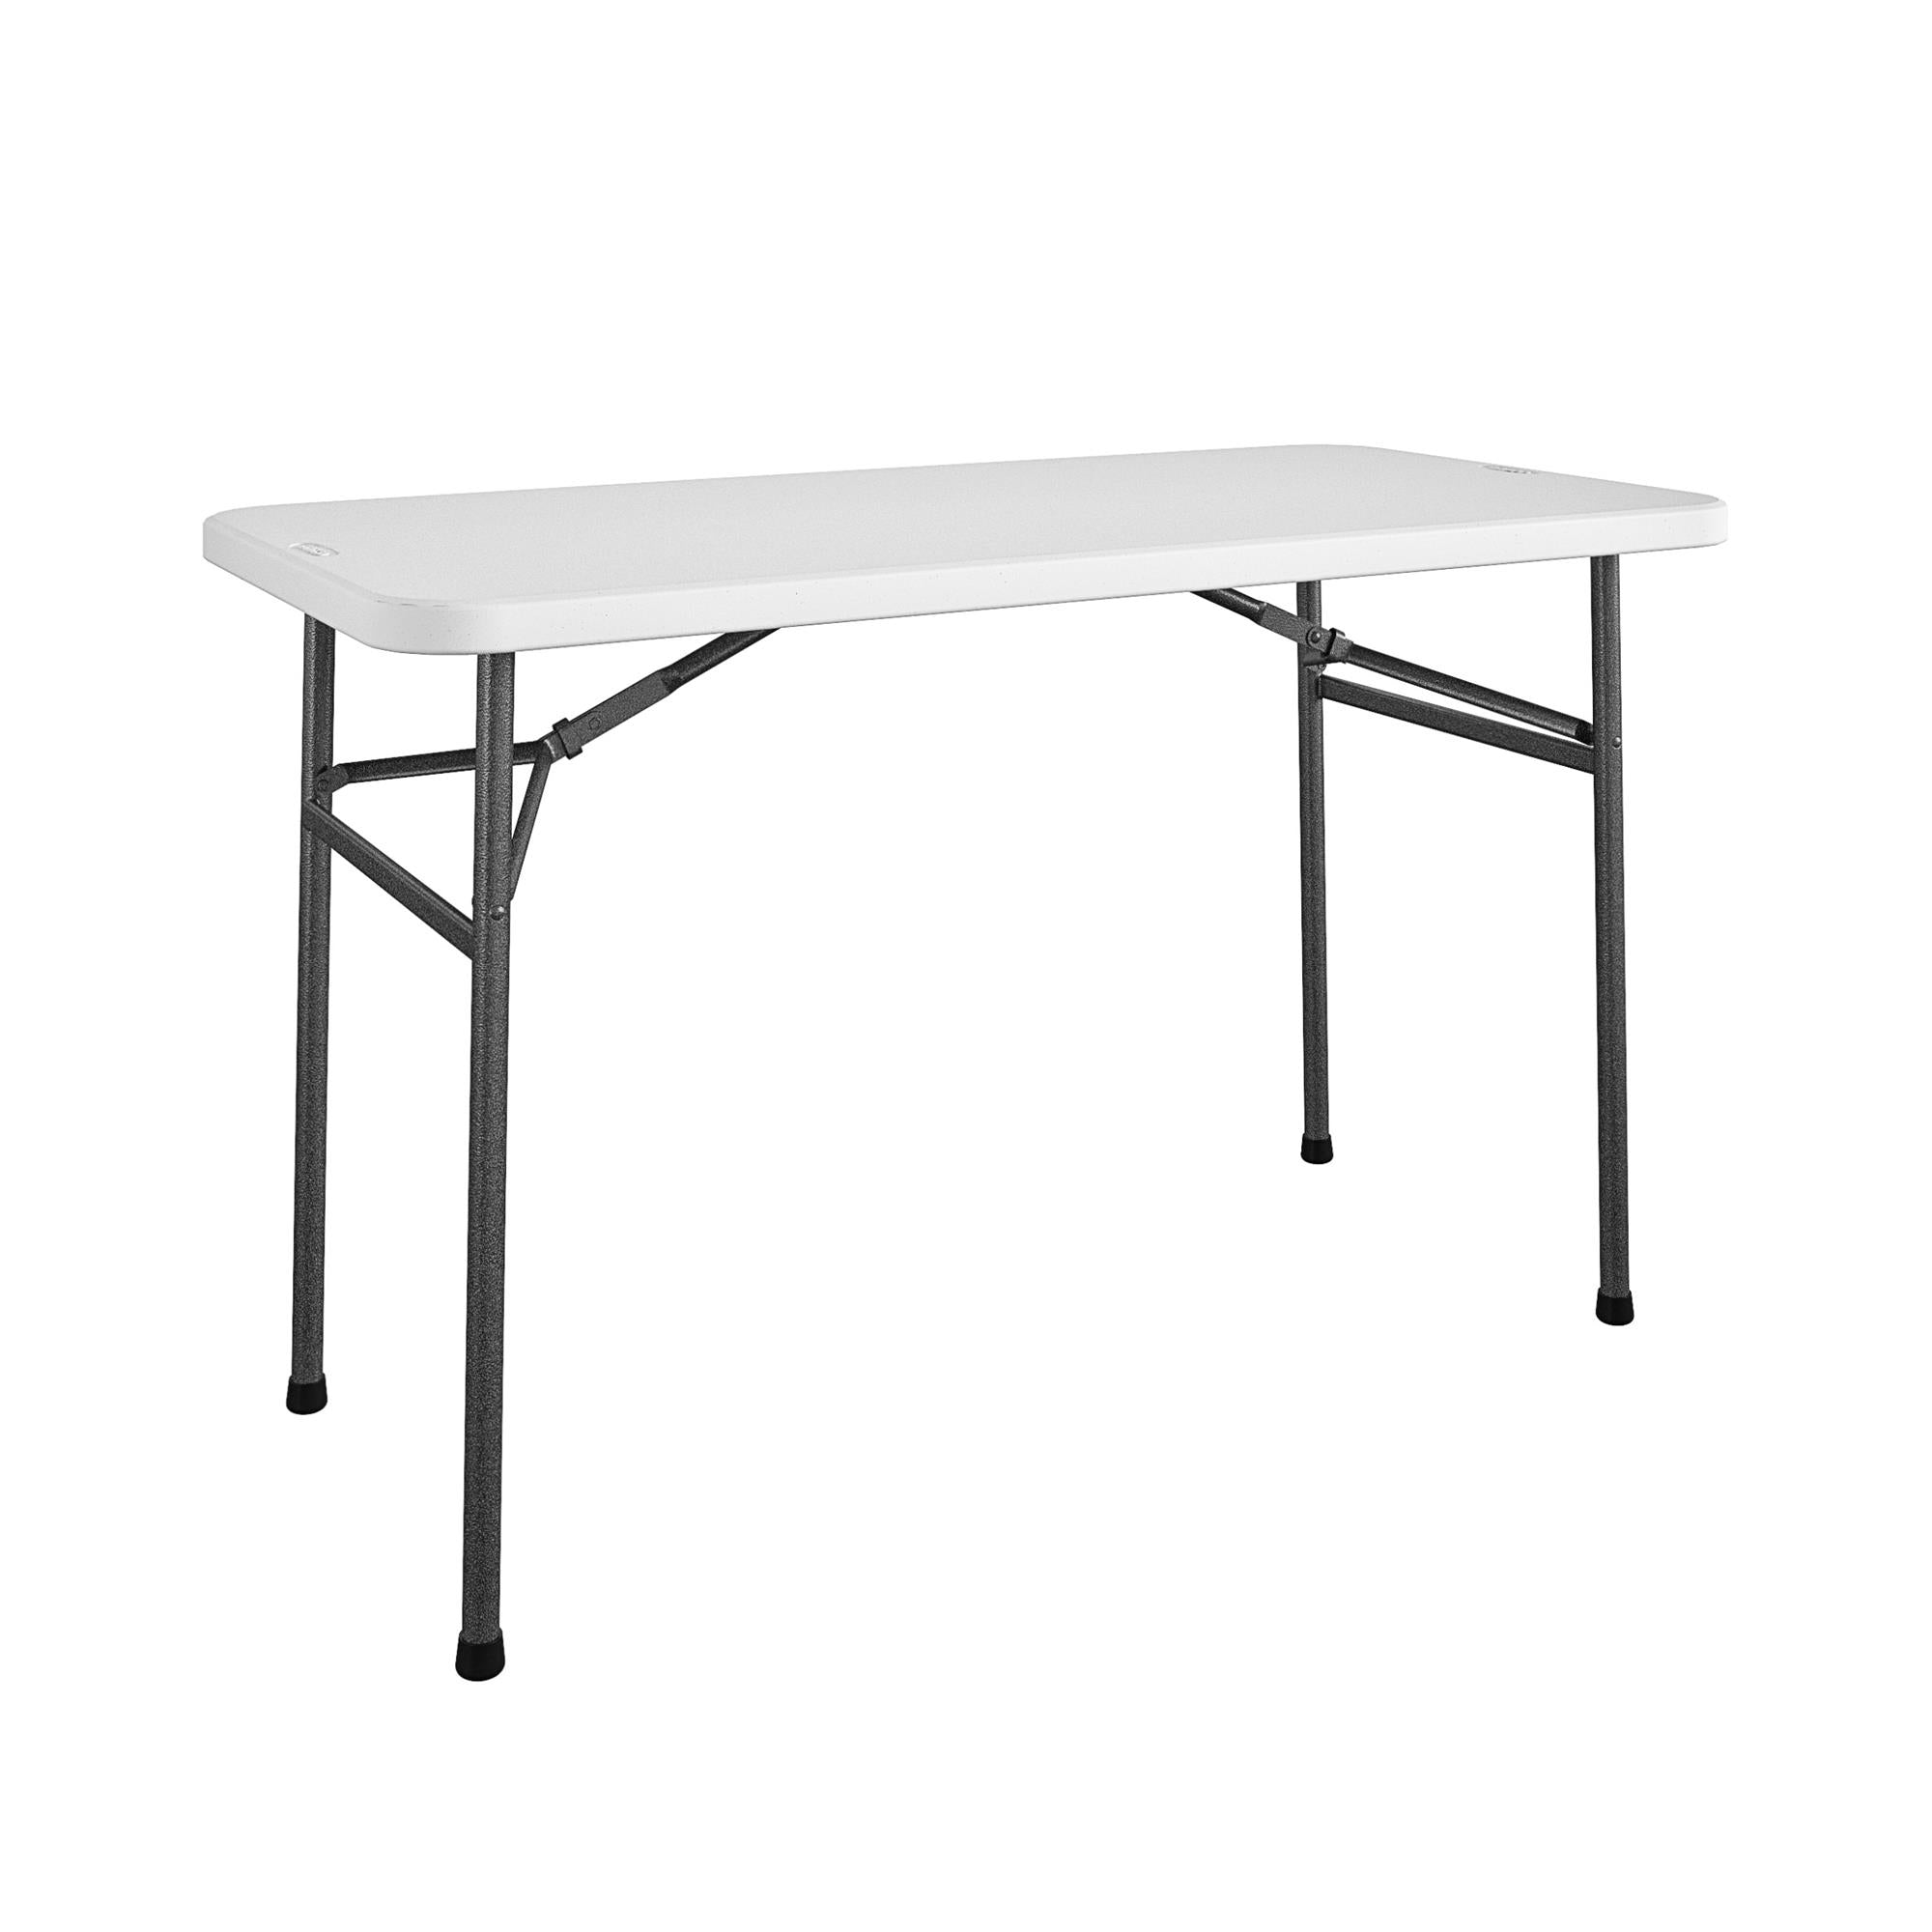 COSCO 4 ft. Straight Folding Utility Table - White - 1-Pack